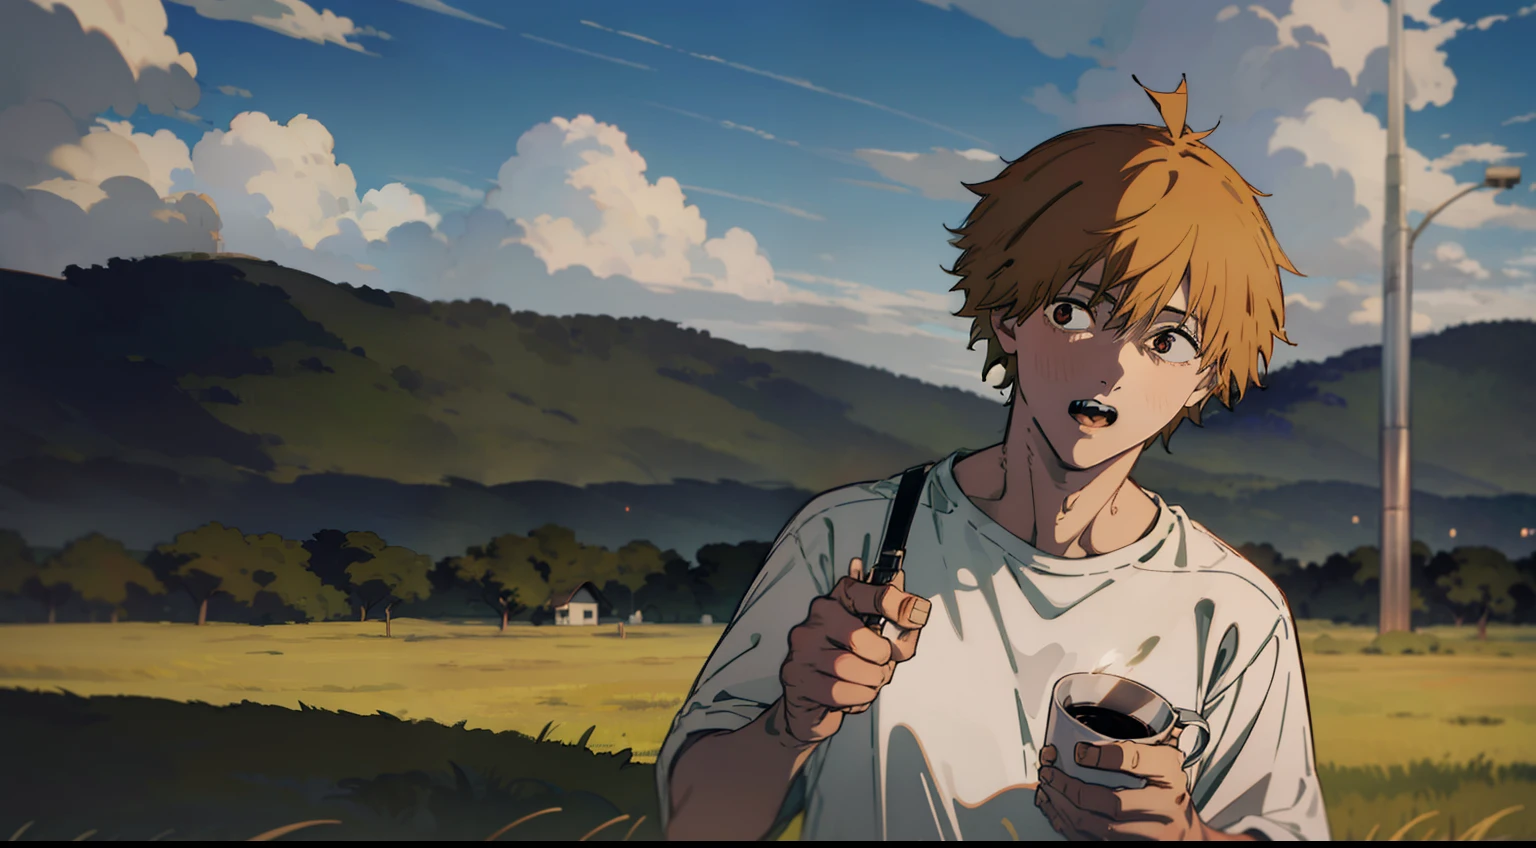 denji with a scared expression in a field